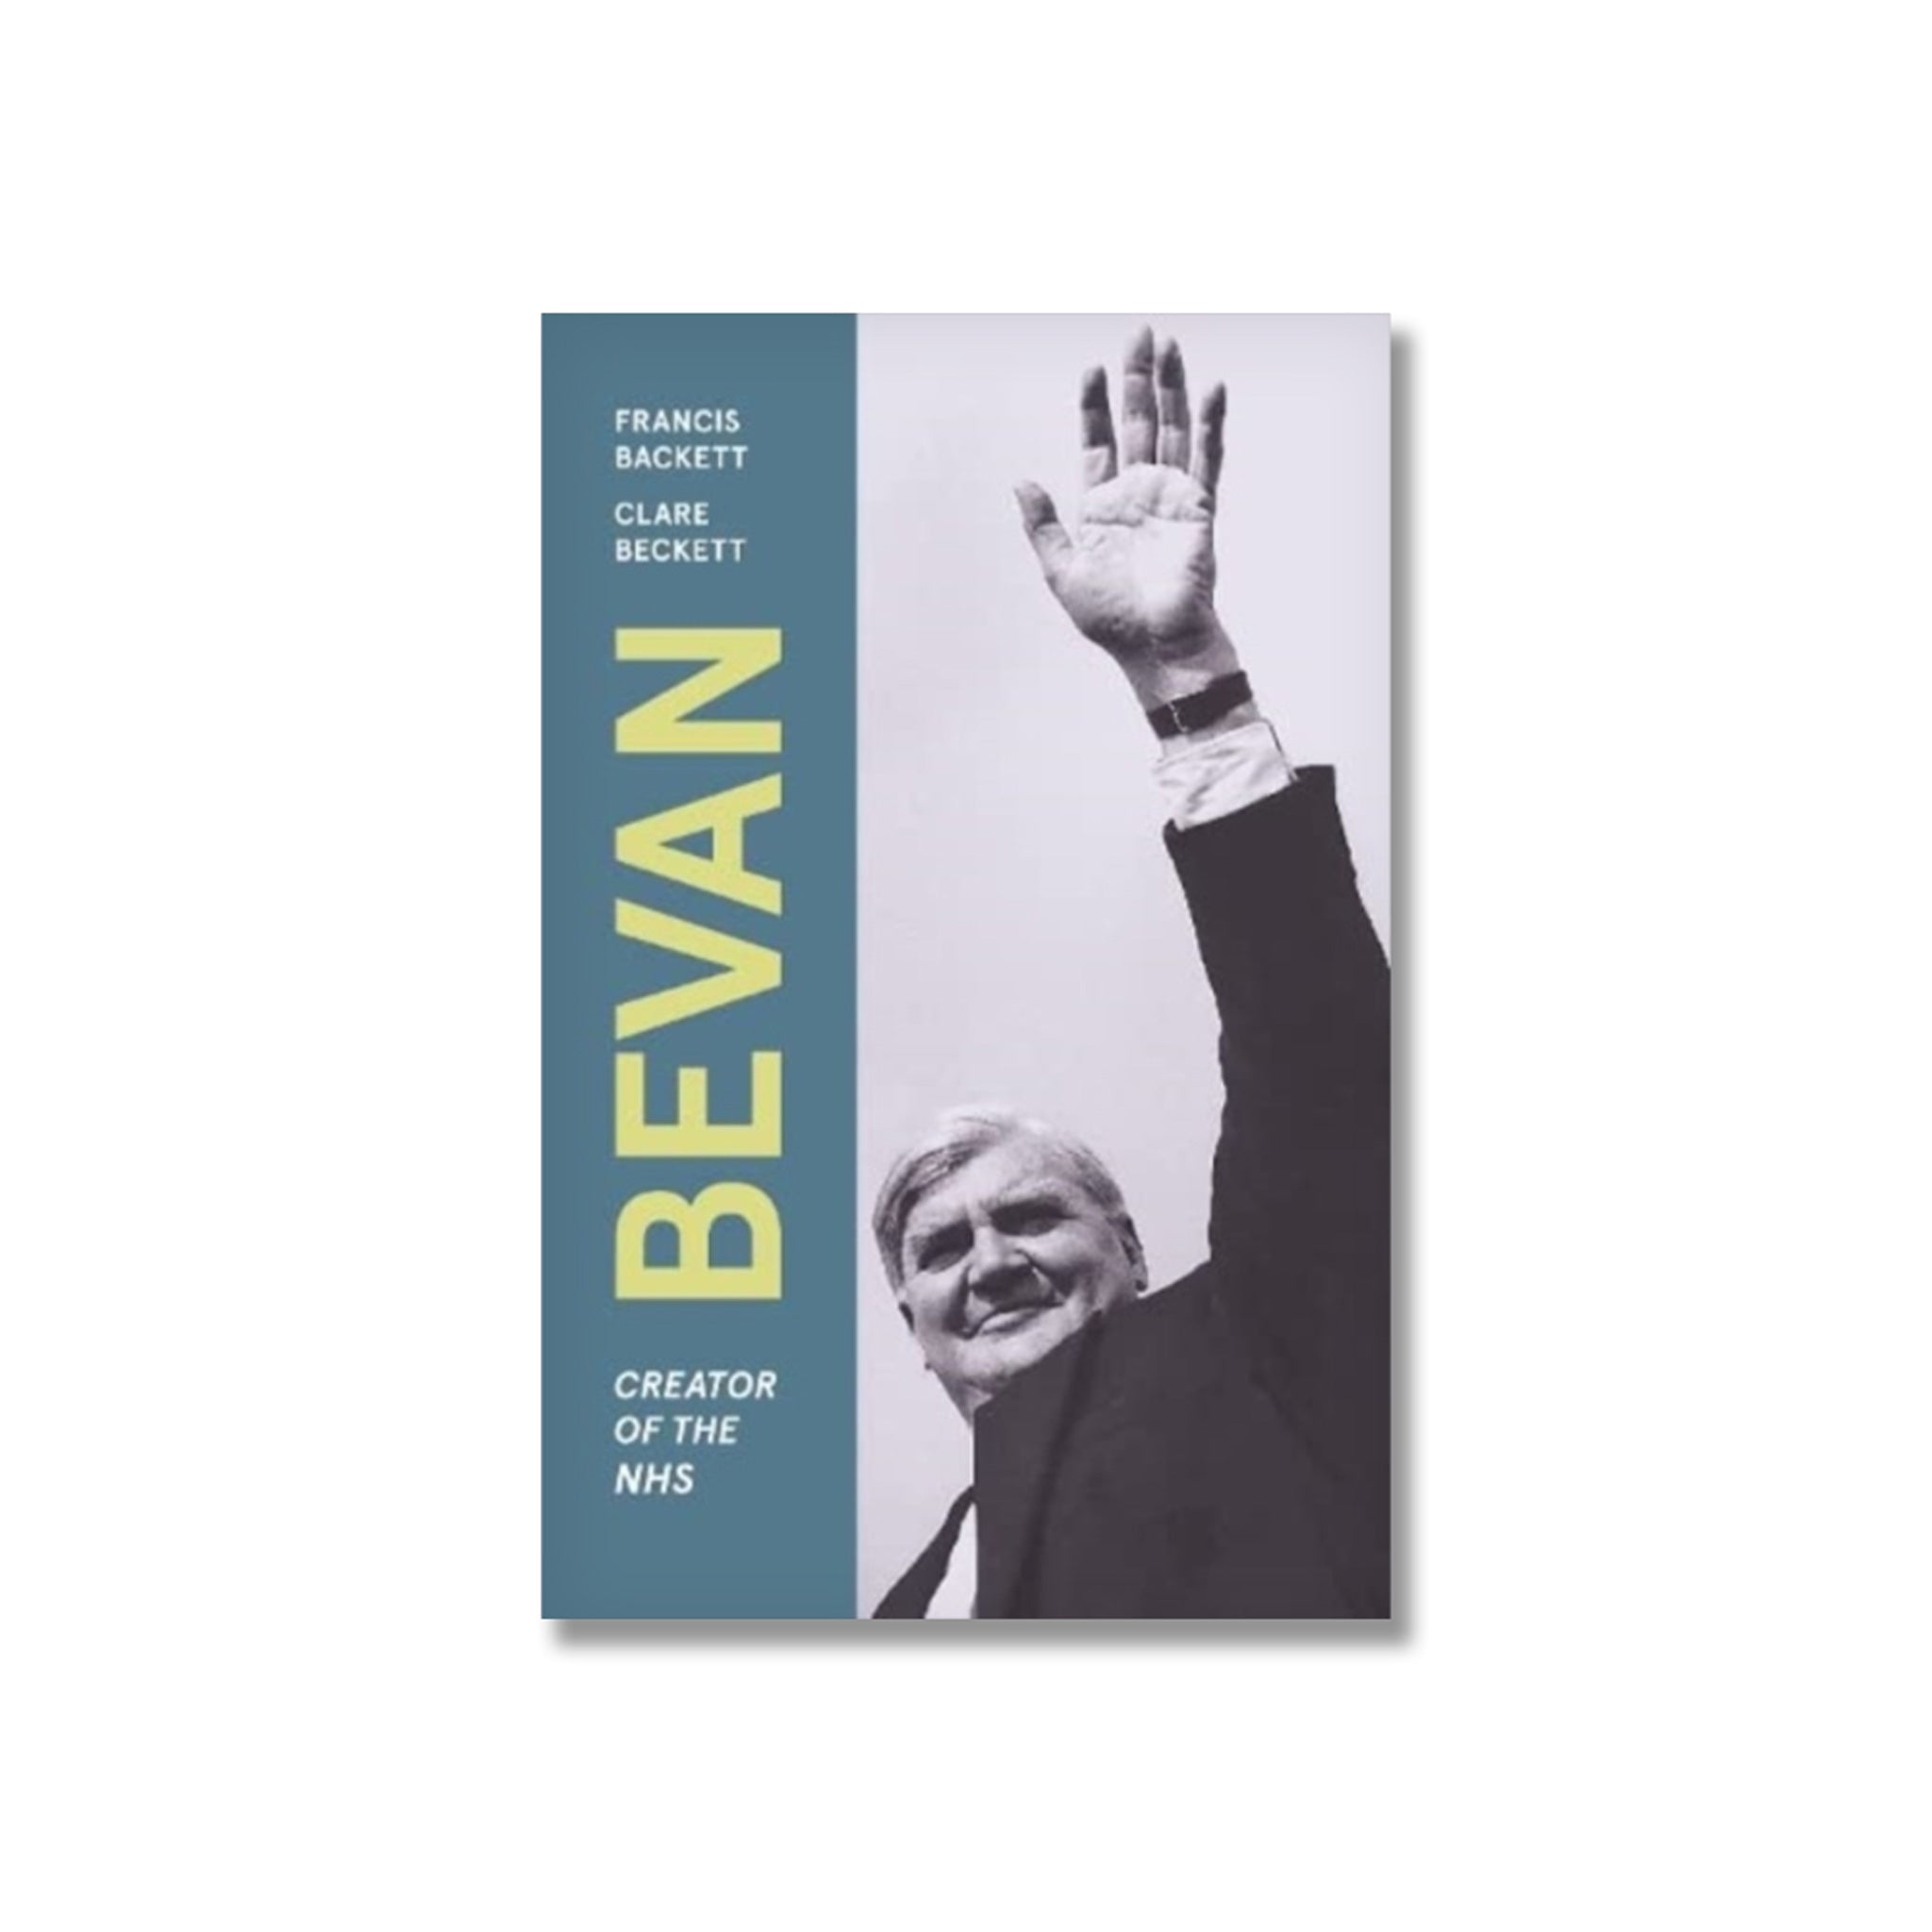 Bevan, Creator of the NHS featured image